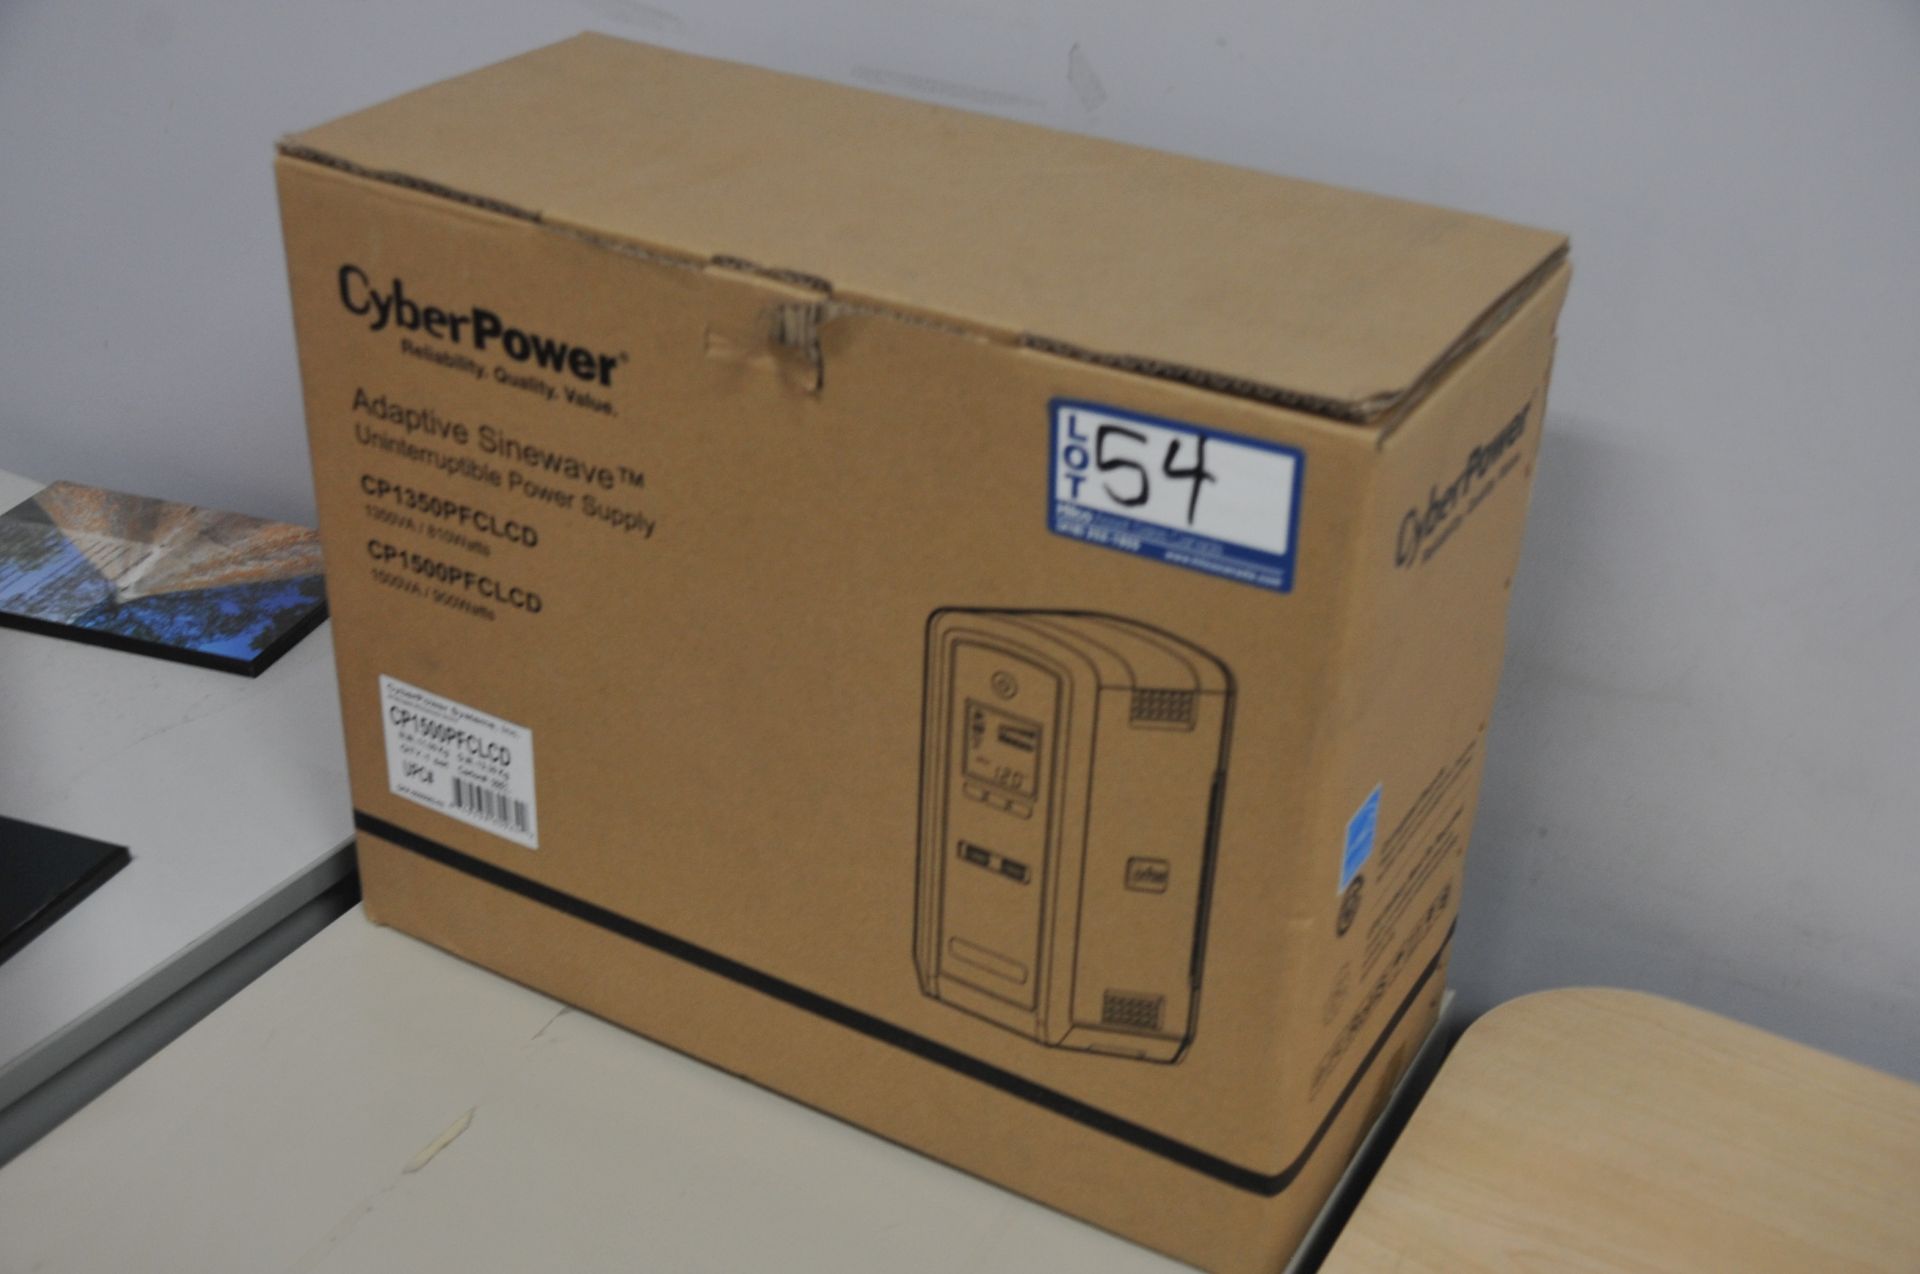 Cyber Model Power CP1500PFCLCD UPS; (NEW)